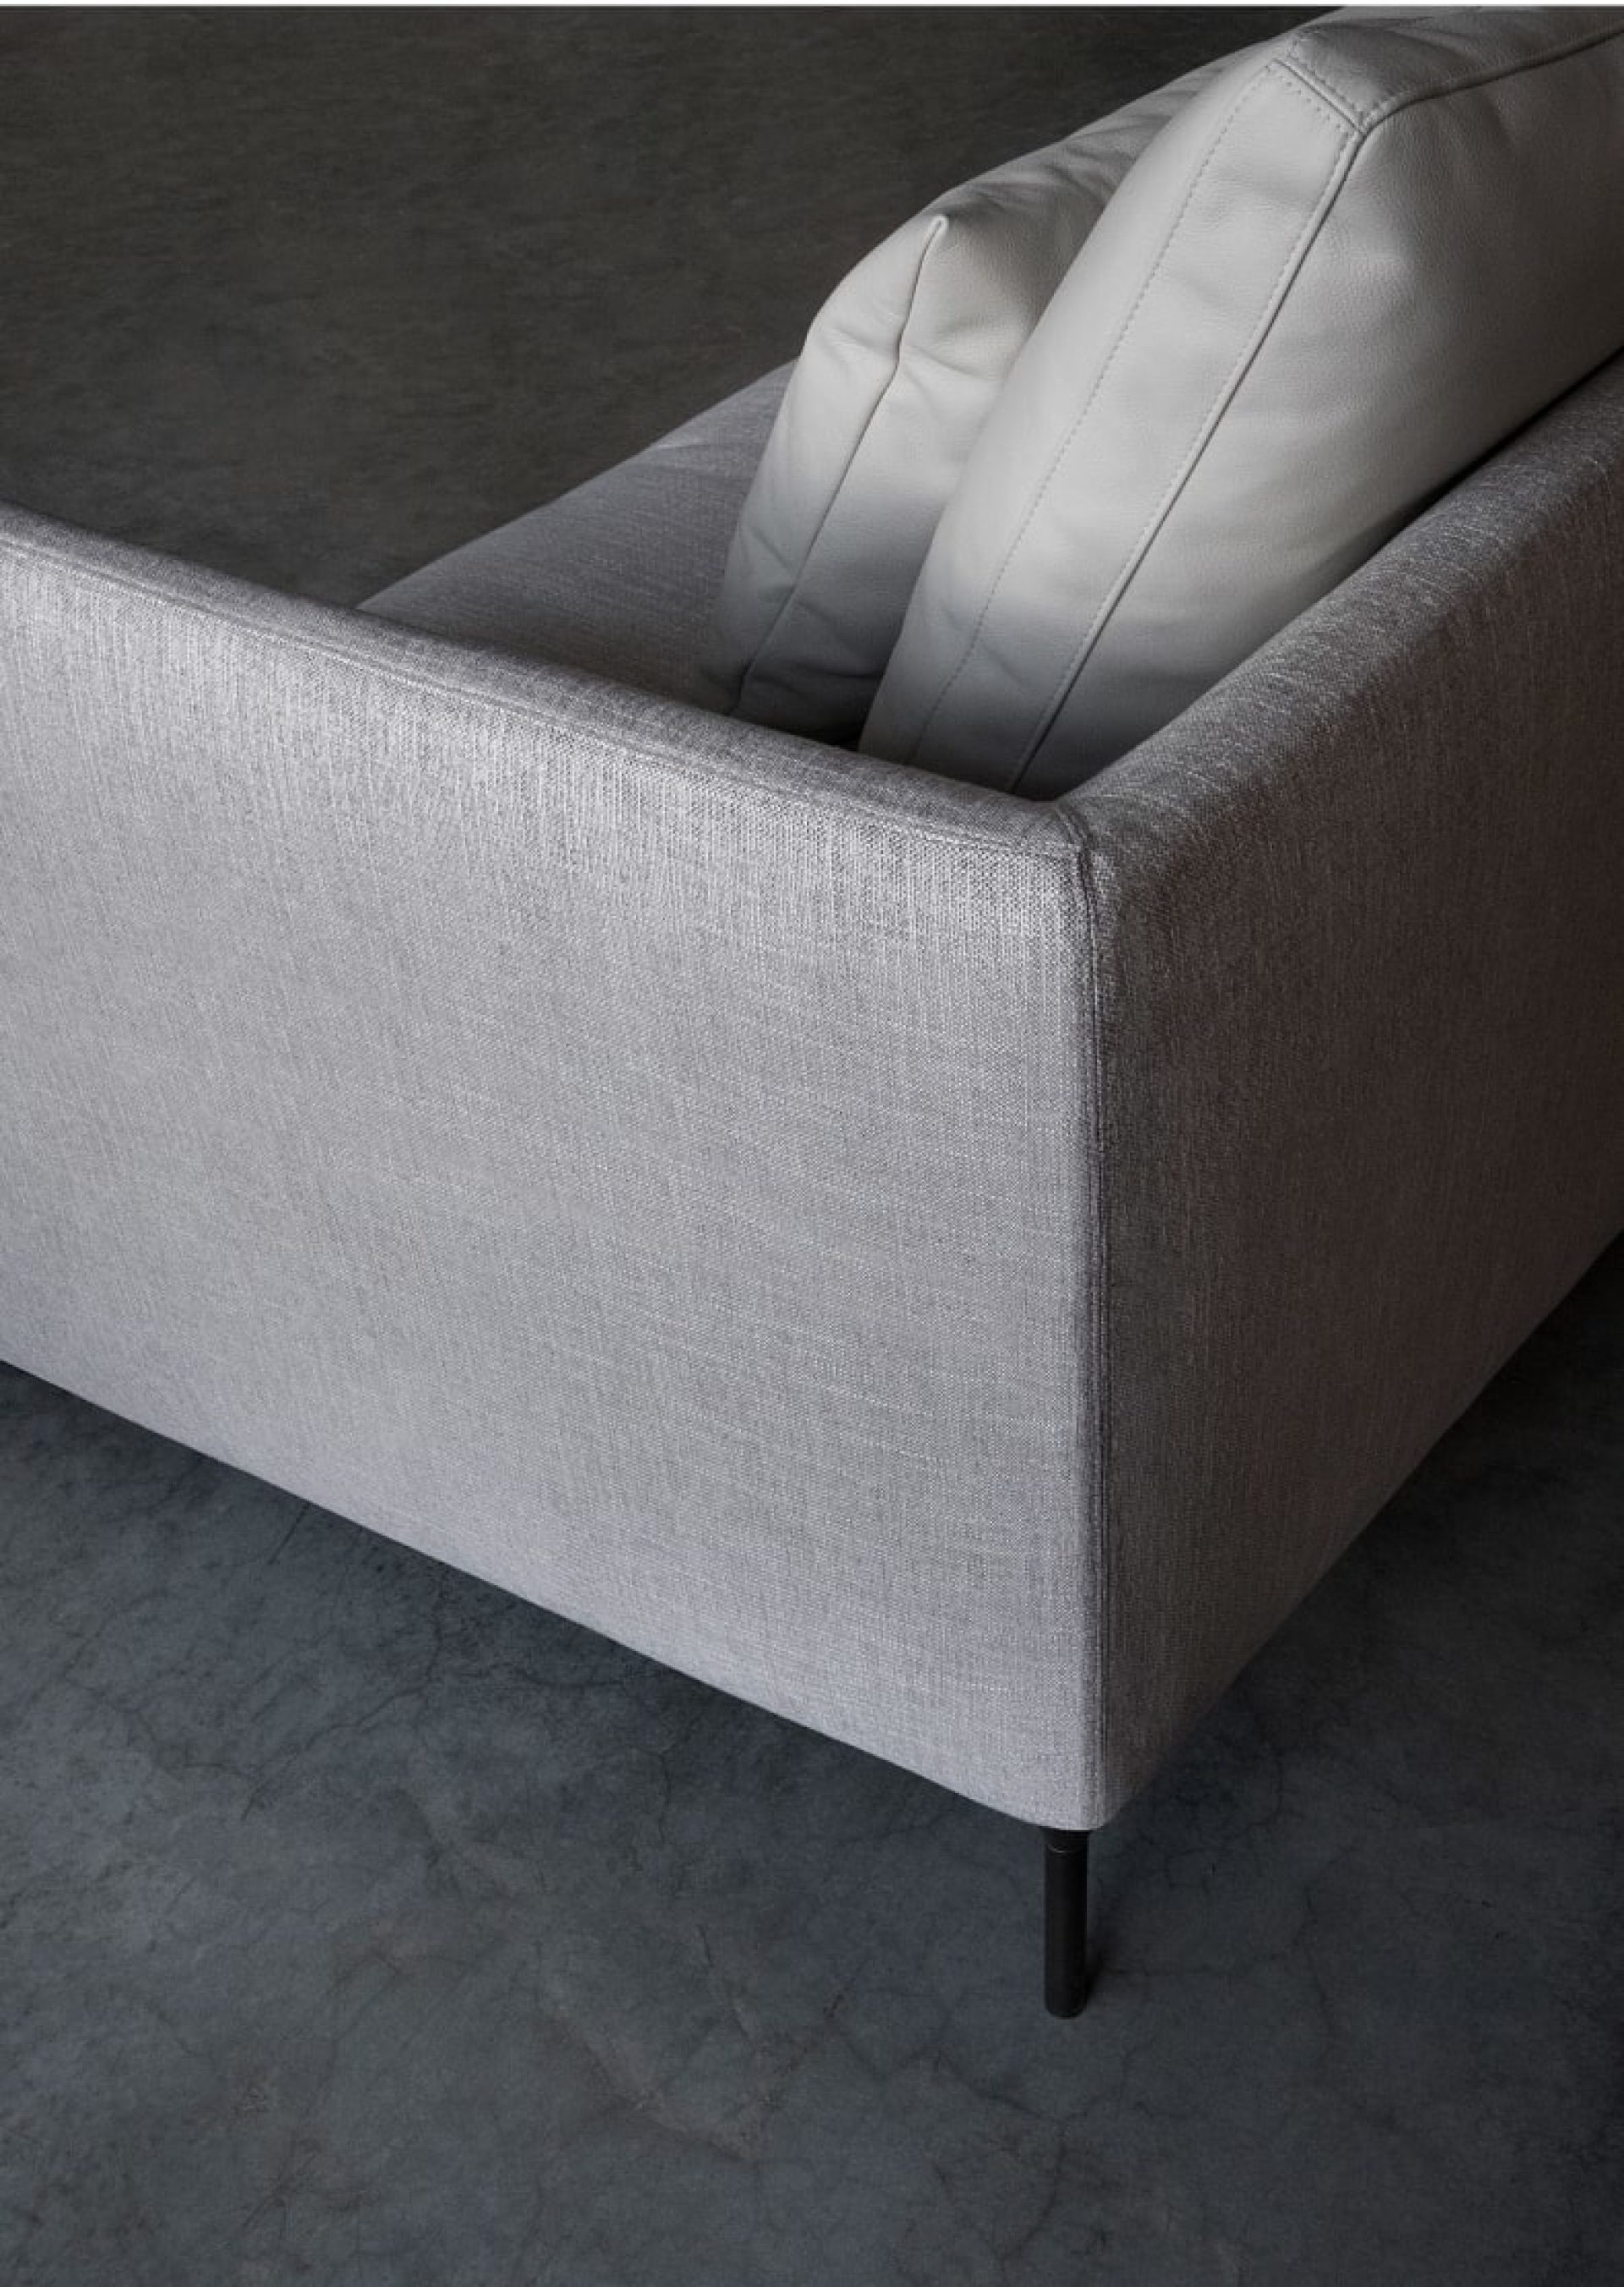 Corner sofa in grey canvas with two cushions and steel legs